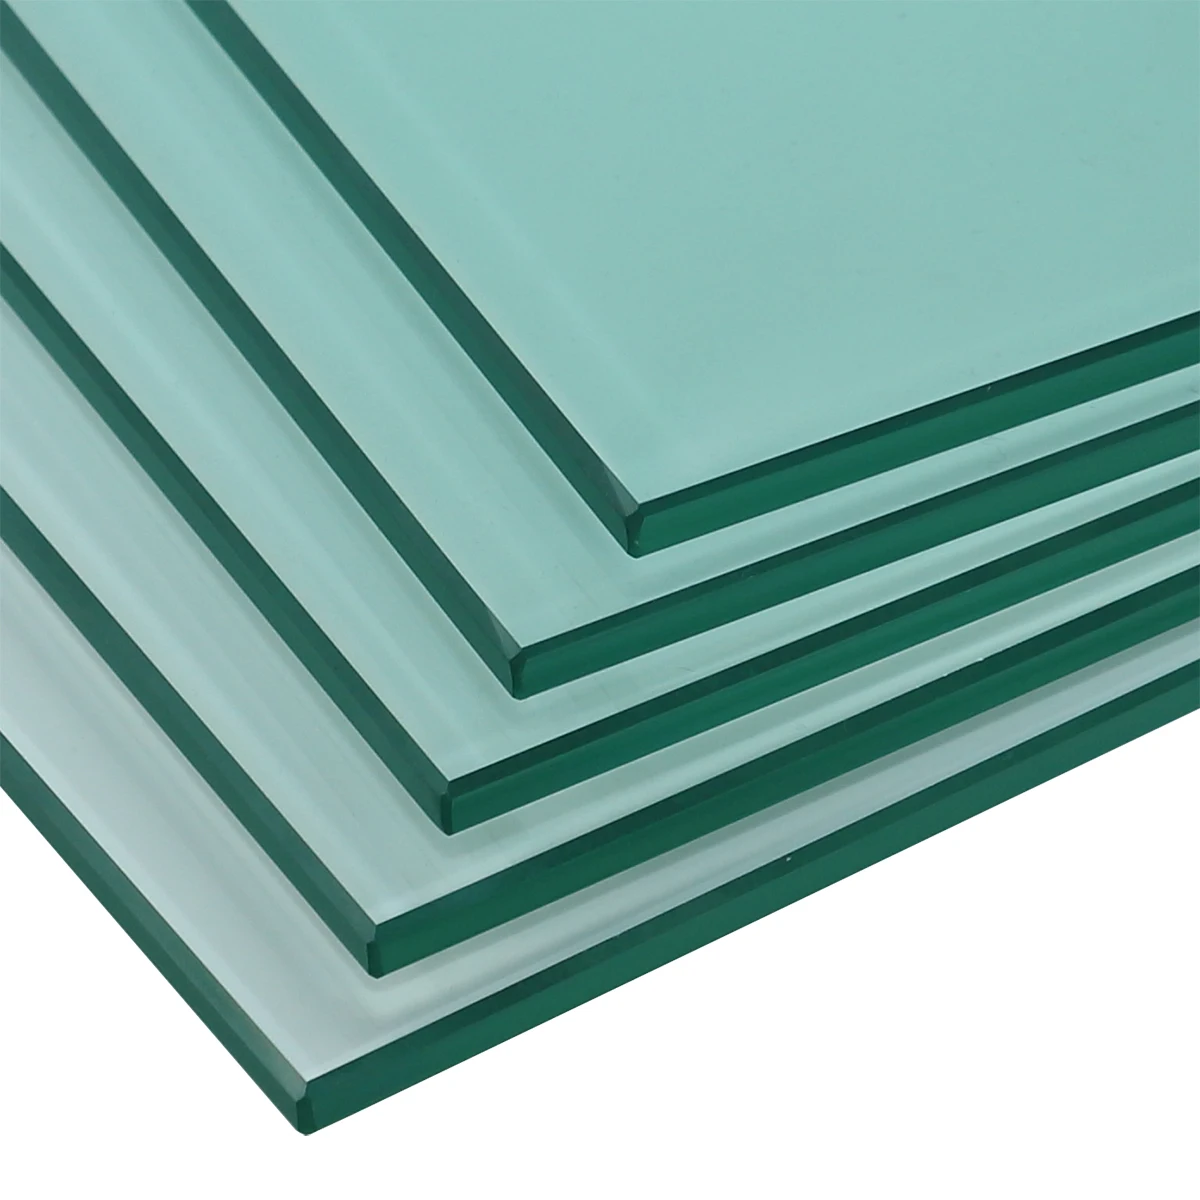 manufacture gooq quality tempered insulated glass